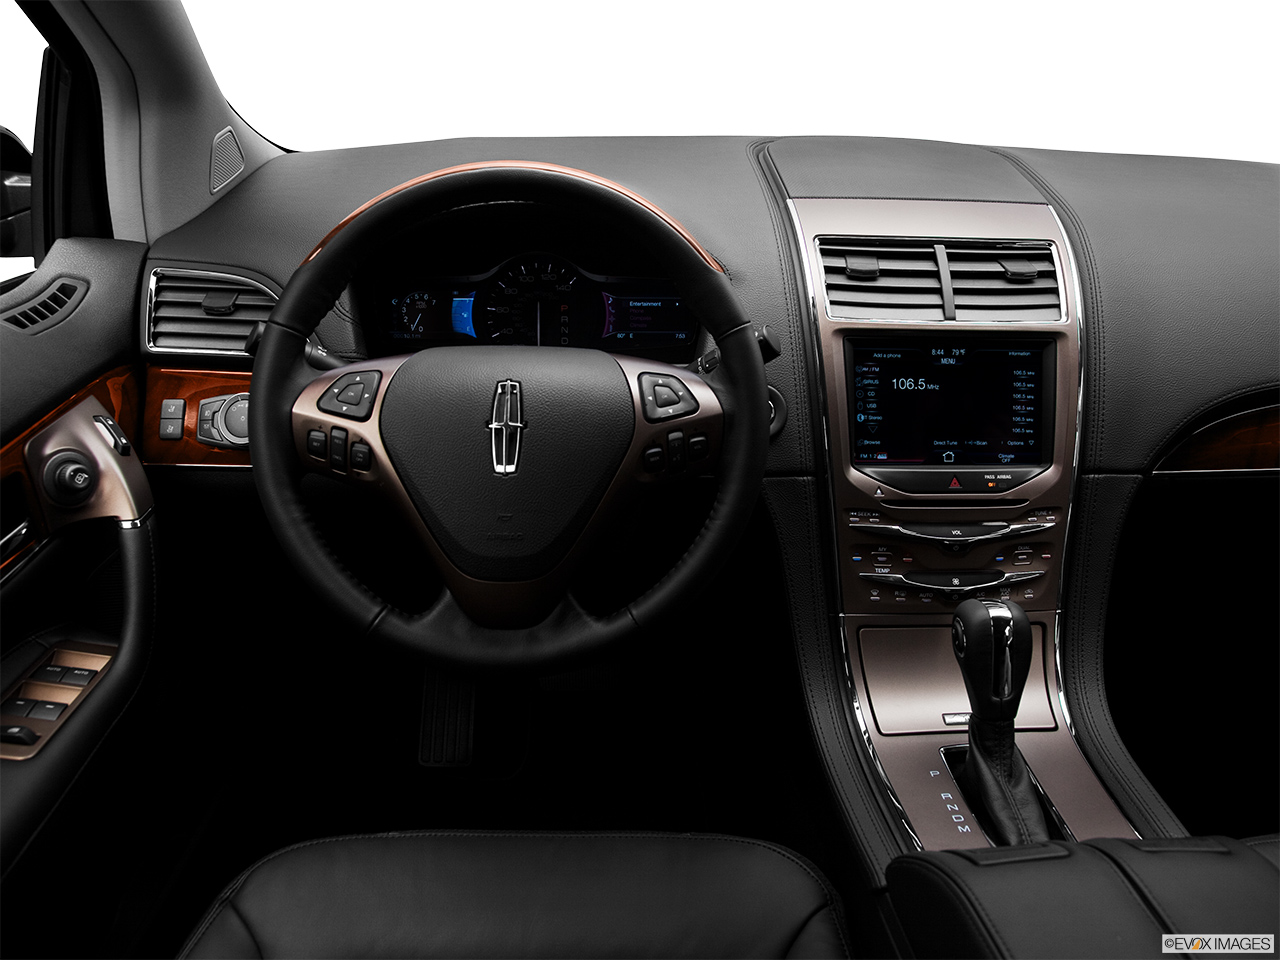 2012 Lincoln MKX FWD Steering wheel/Center Console. 